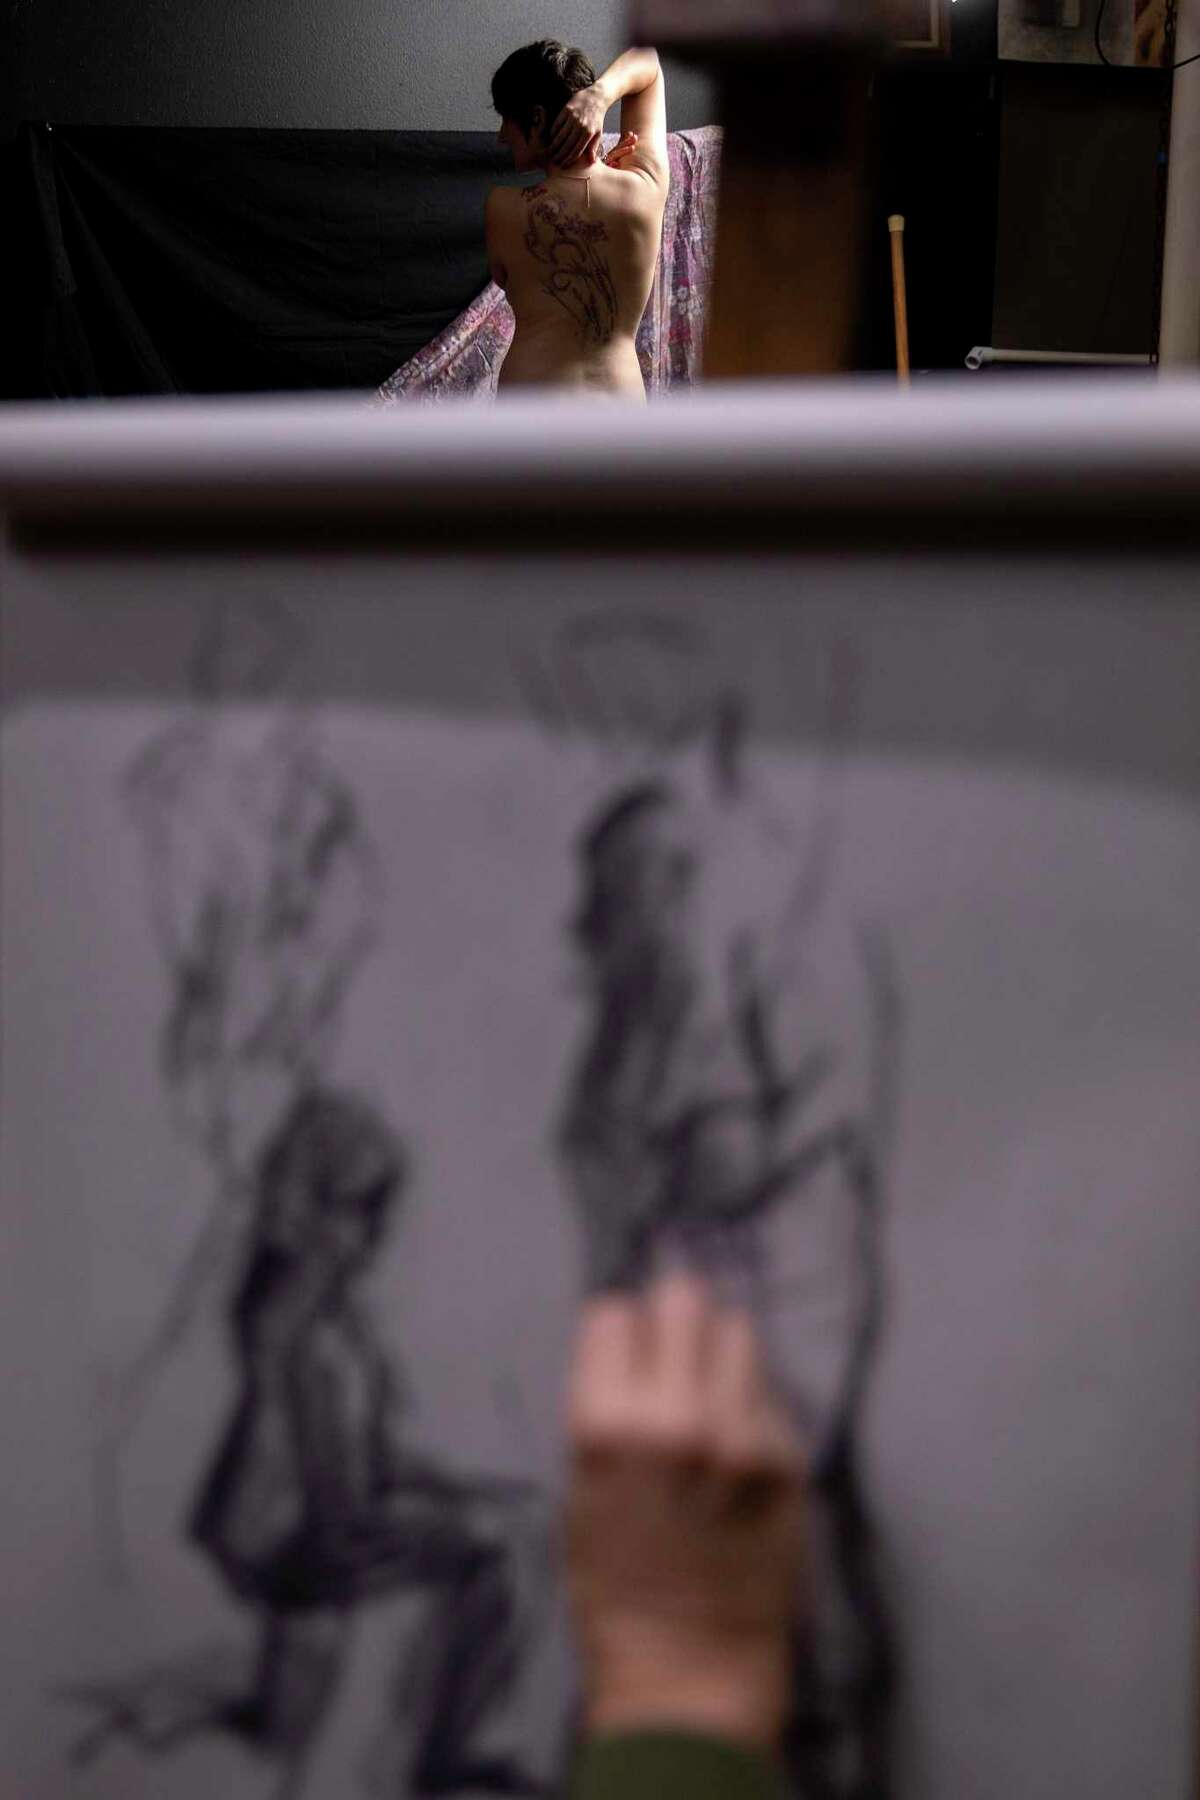 Dana Buzzelli poses for artists at the Coppini Academy of Fine Arts during a nude figure drawing class.